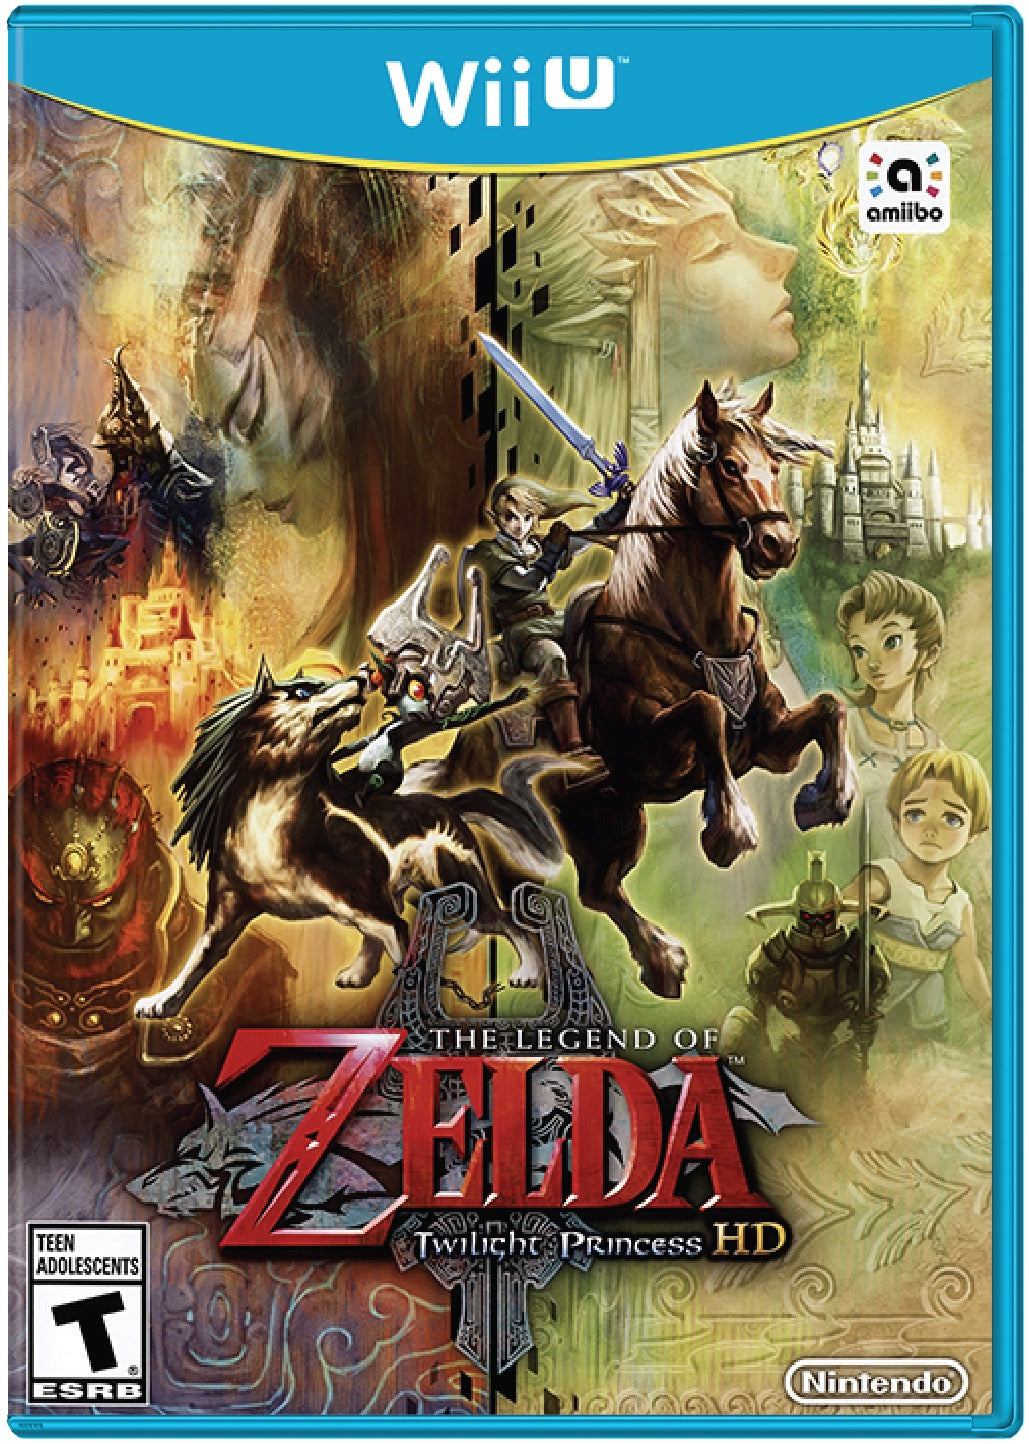 The Legend of Zelda Twilight Princess HD Cover Art and Product Photo